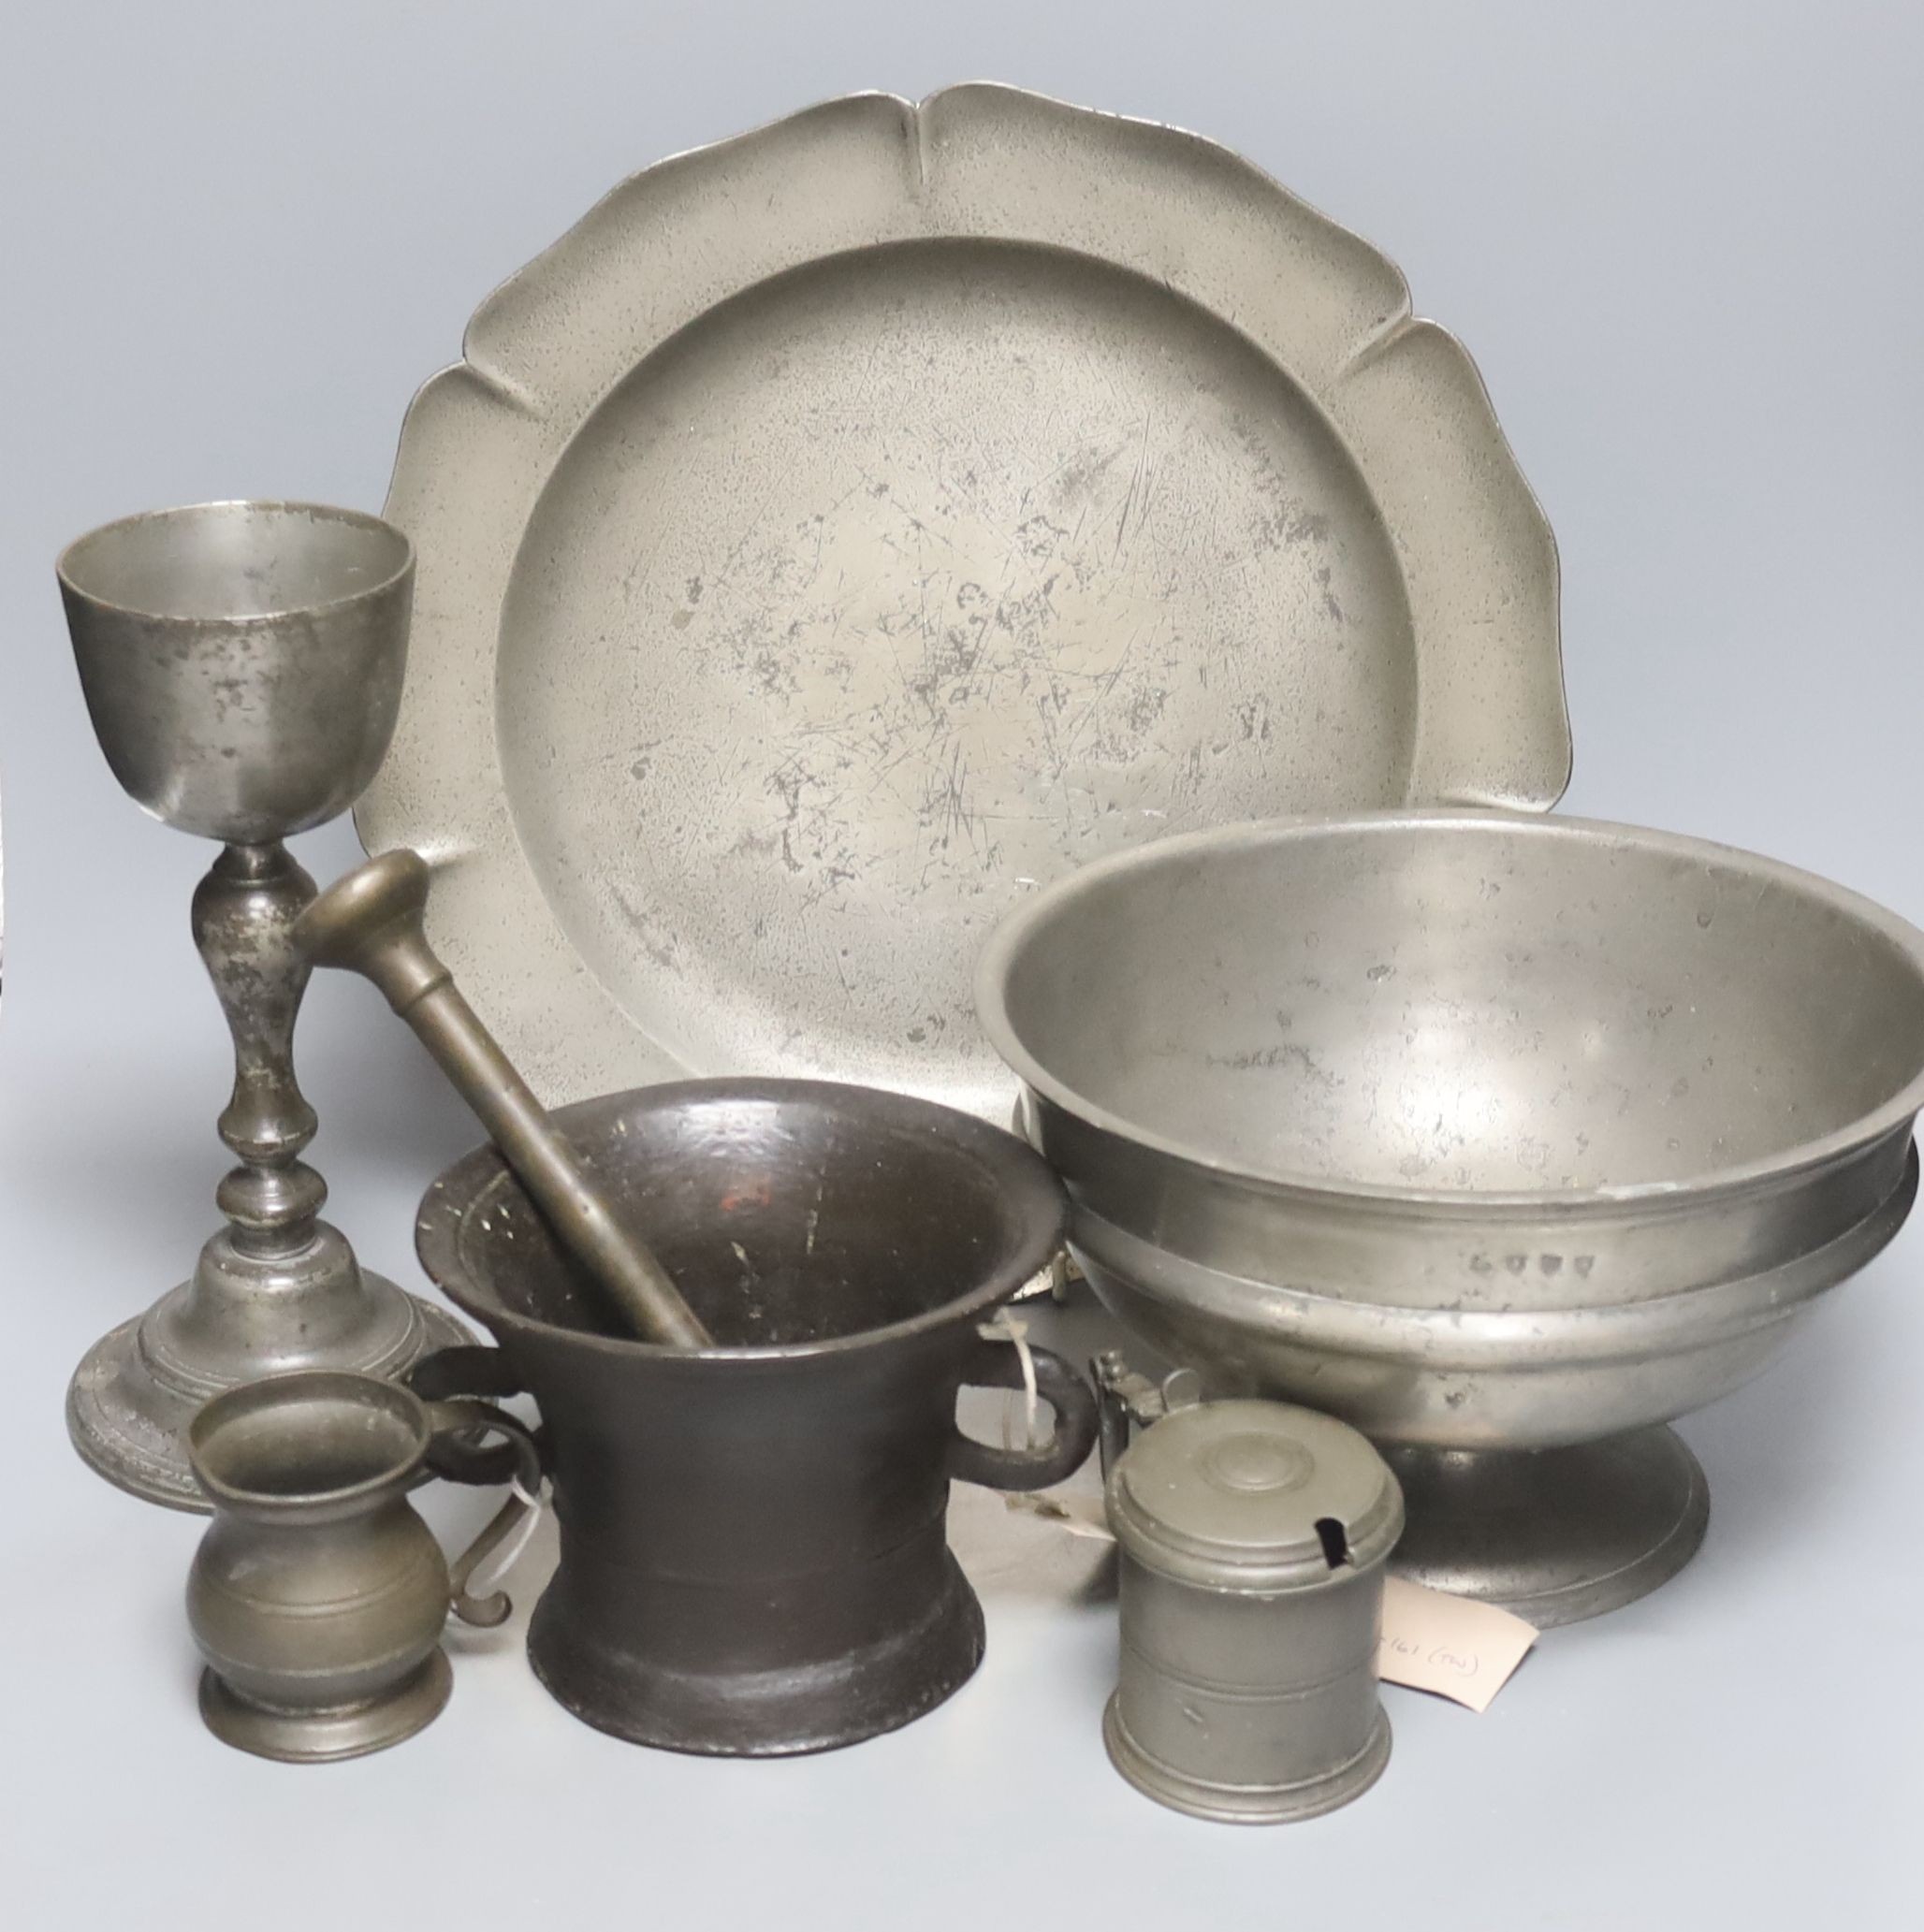 A pewter pedestal bowl, a barbed and crested dish, three other items of pewter and a 17th/18th century bronze pestle and mortar